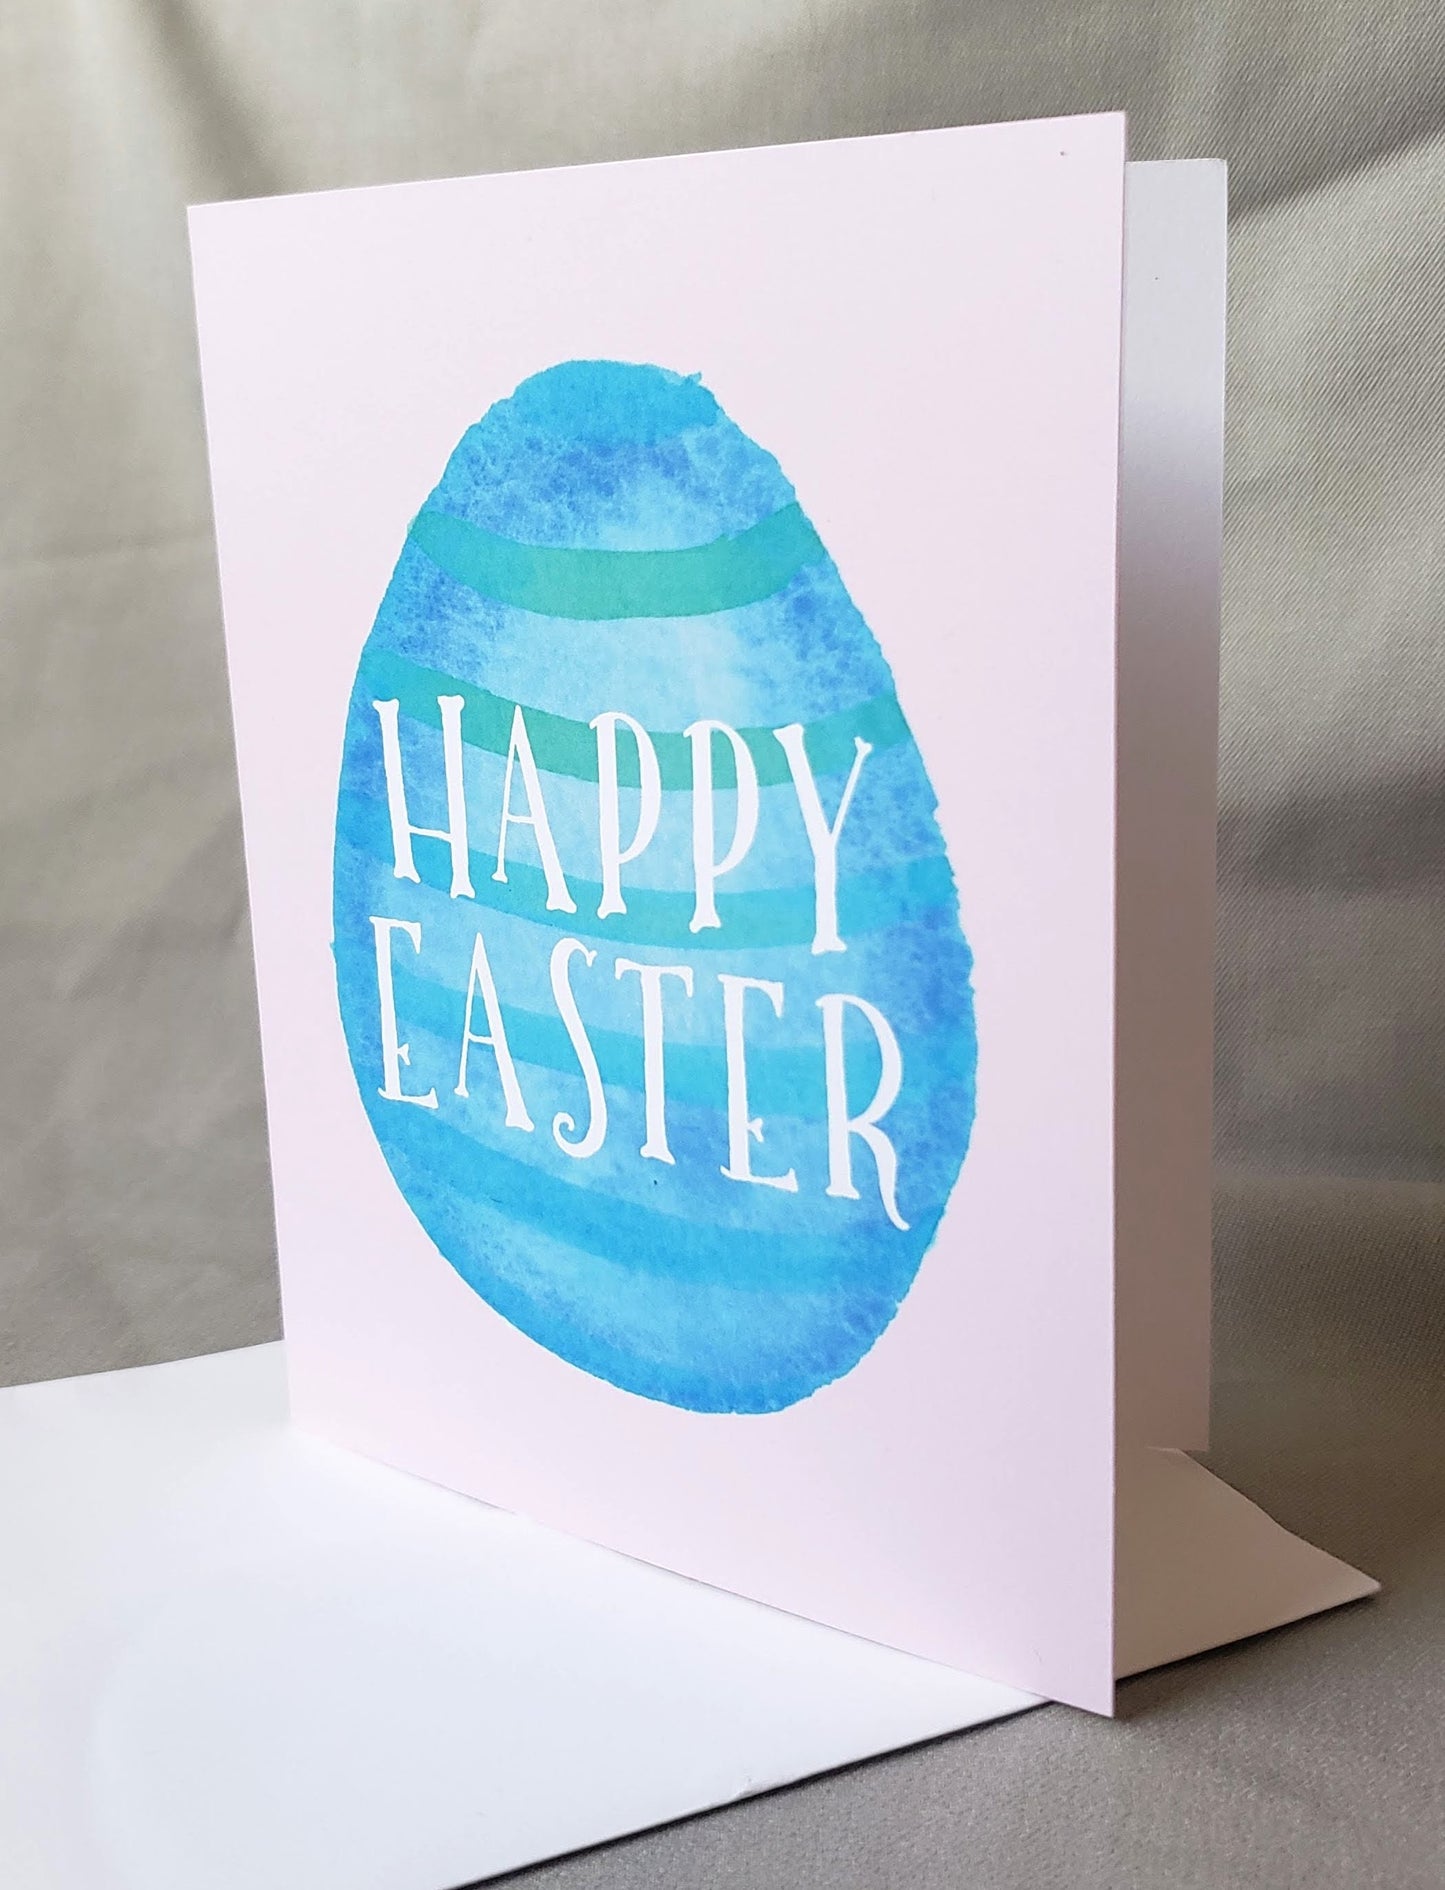 Easter Egg Greeting Card "Happy Easter"